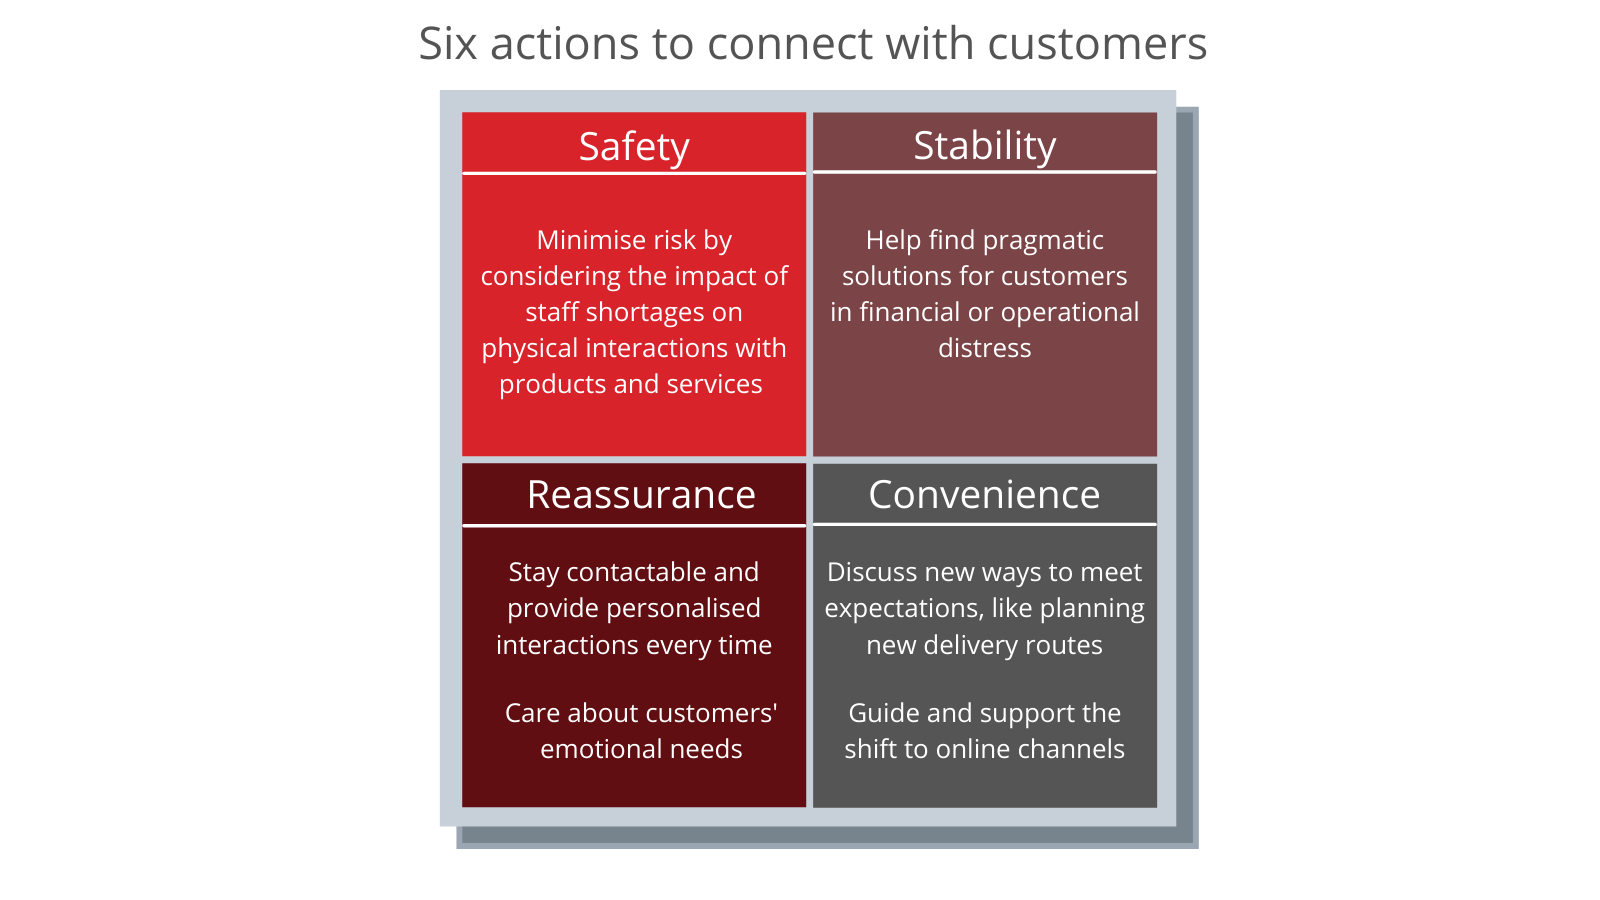 Six actions to connect with customers. 1. Minimise risk. 2. Help find pragmatic solutions for customers. 3. Stay contactable and personalise interactions. 4. Care about customers' emotions. 5. Discuss new ways to meet expectations. 6. Support the shift to online channel